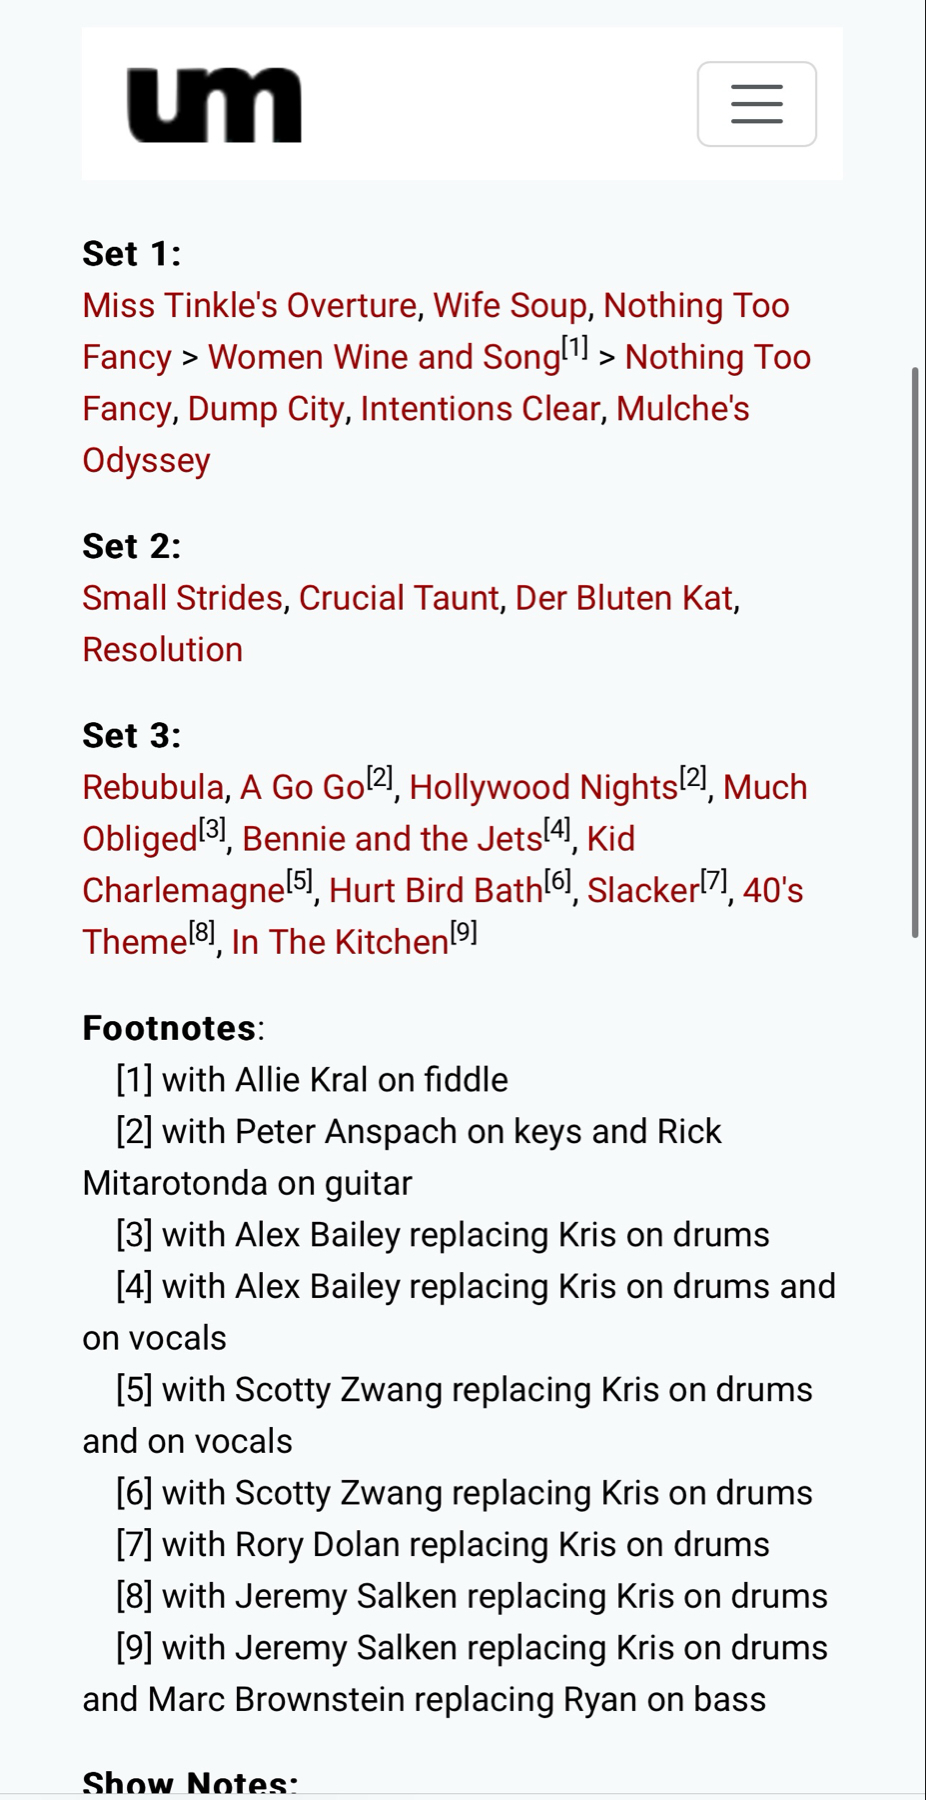 A screenshot of a concert setlist showing three sets of songs played by a band with footnotes indicating guest musicians on various songs, and references to specific musicians replacing band members for certain songs.